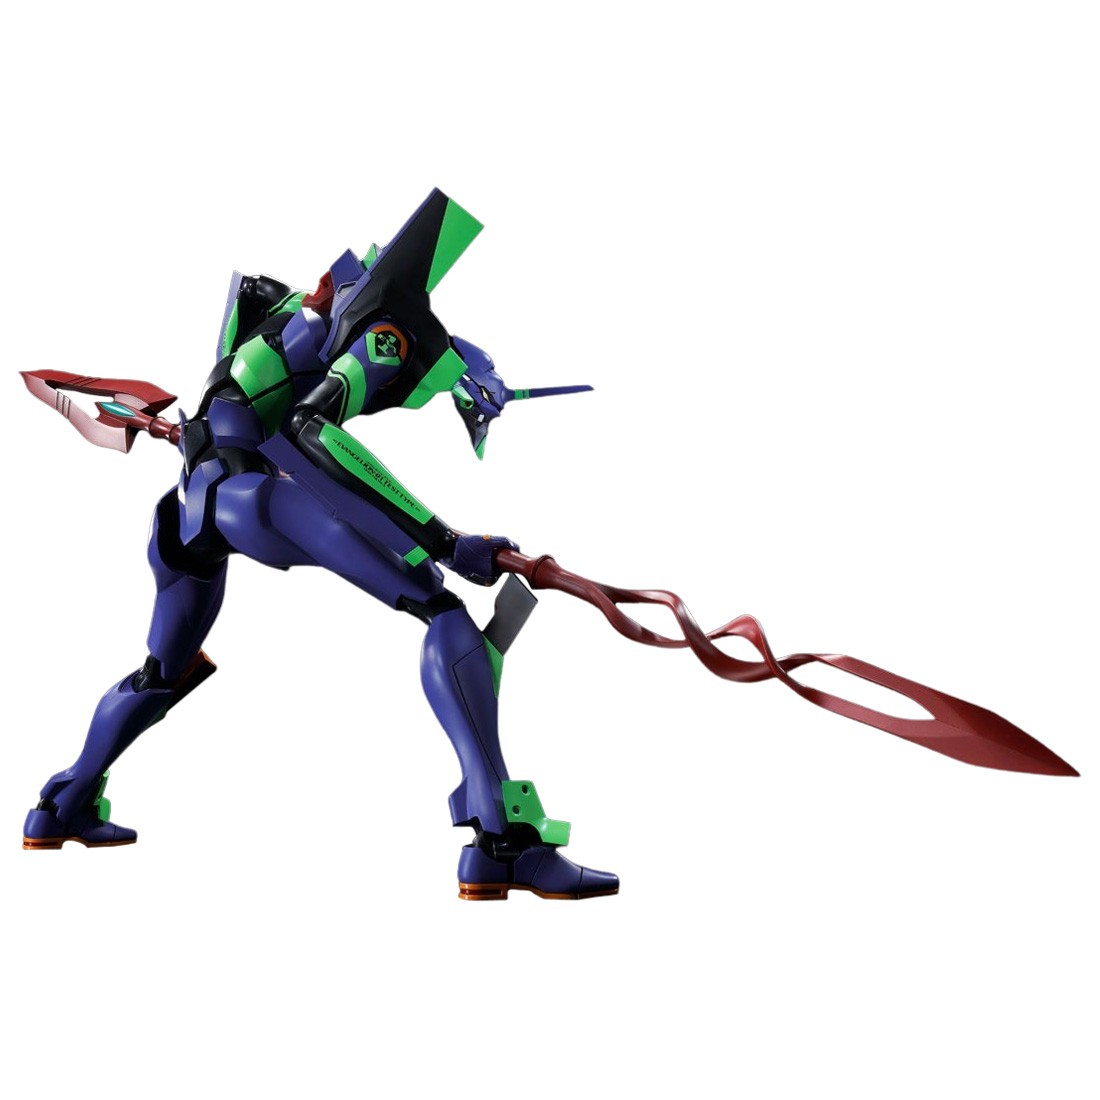 Bandai Dynaction Evangelion 3.0+1.0 Thrice Upon a Time Multipurpose Humanoid Decisive Weapon Evangelion Test Type-01 And Spear Of Cassius Renewal Color Edition Figure (purple)